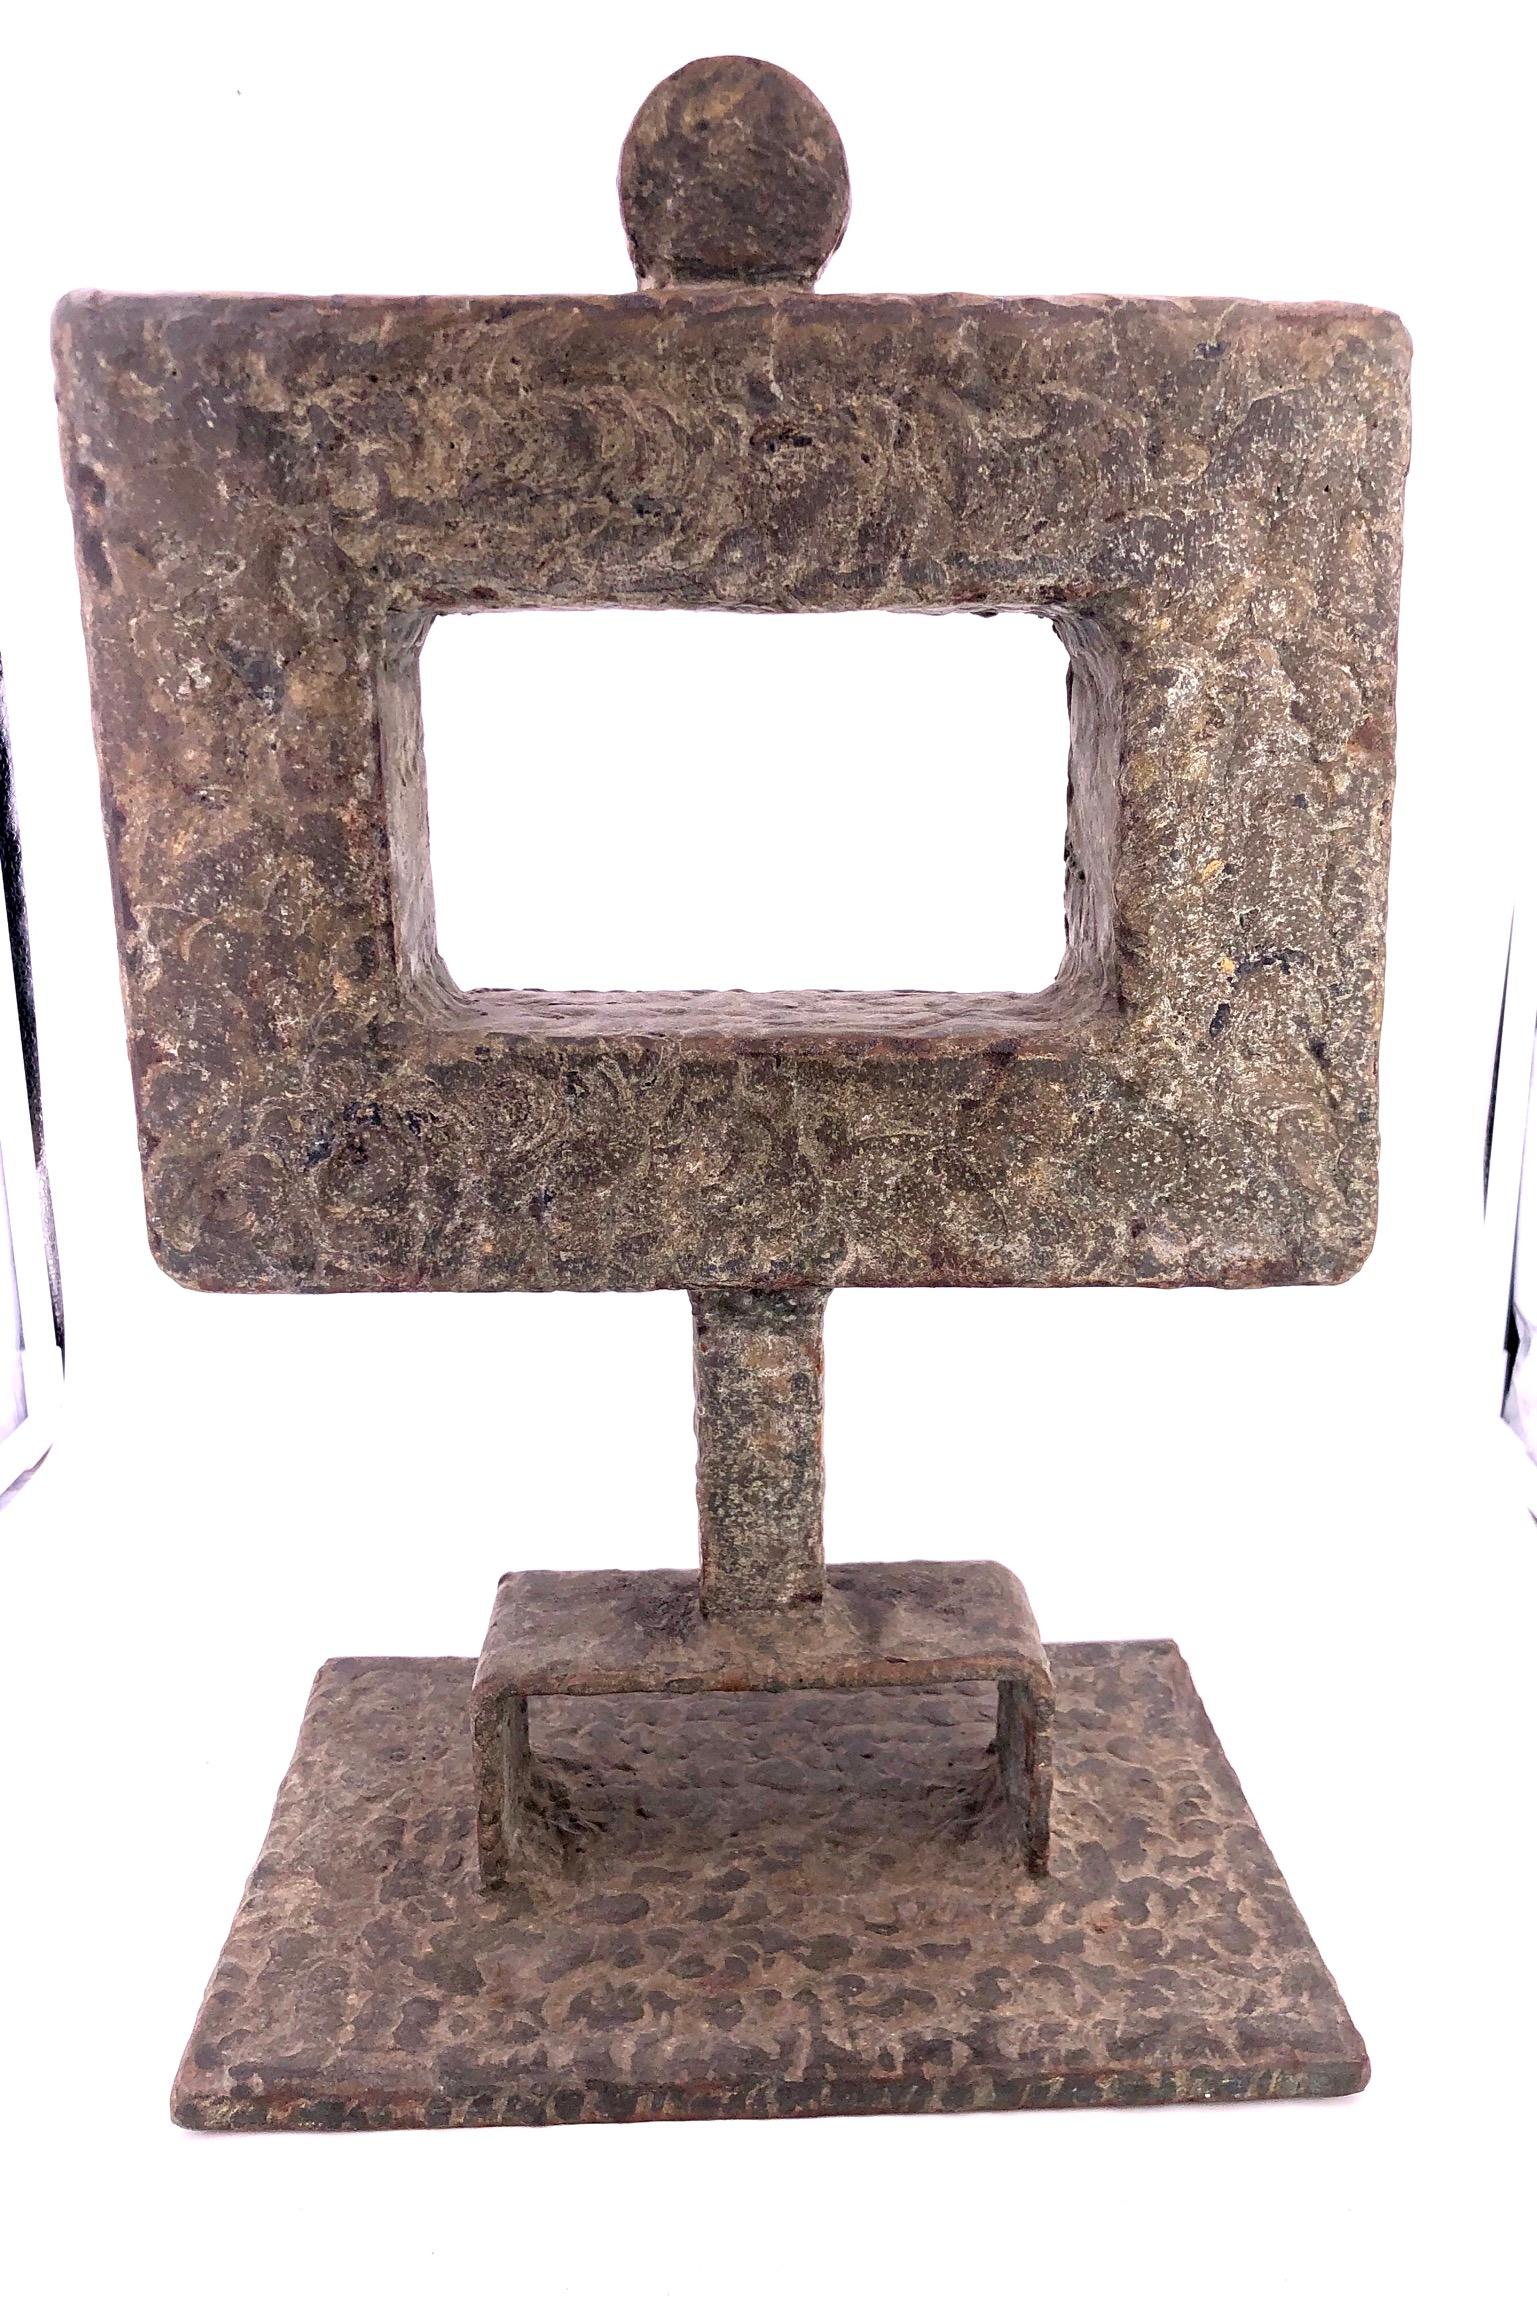 Abstract striking bronze sculpture by California artist Clay Walker, circa 1960s nice and heavy very impressive signed on the base.